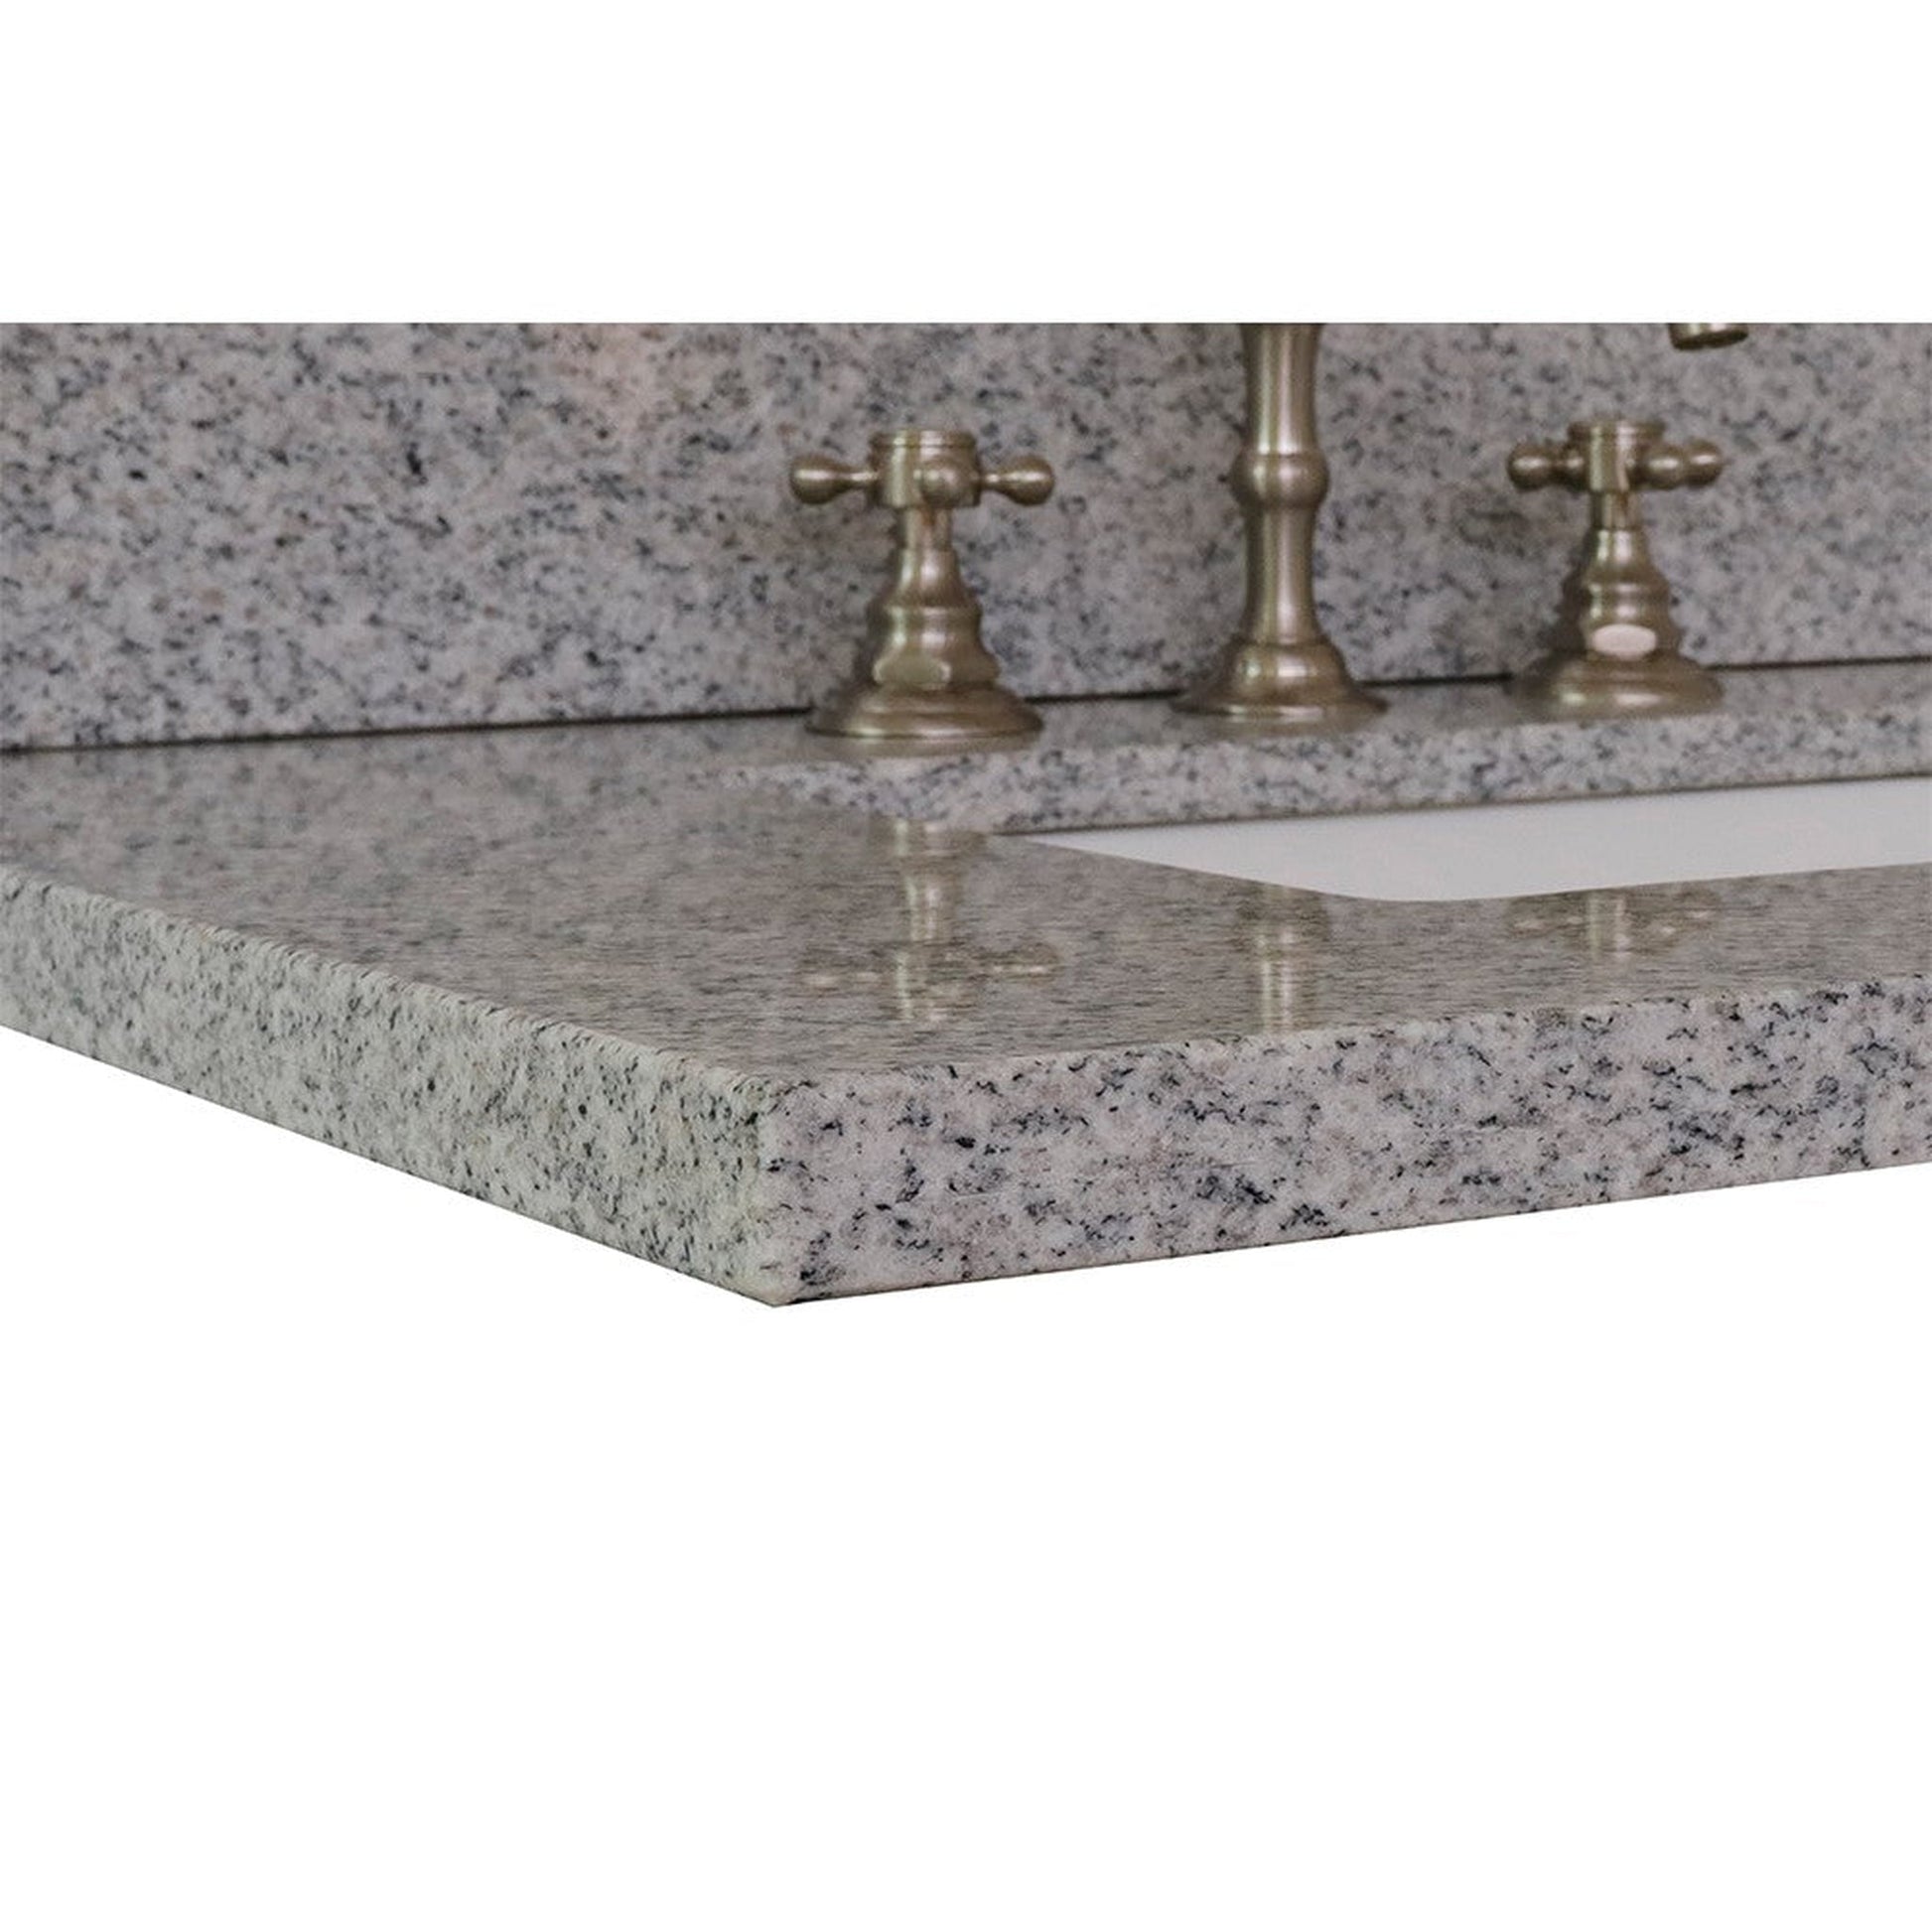 Bellaterra Home 49" x 22" Gray Granite Three Hole Vanity Top With Undermount Rectangular Sink and Overflow